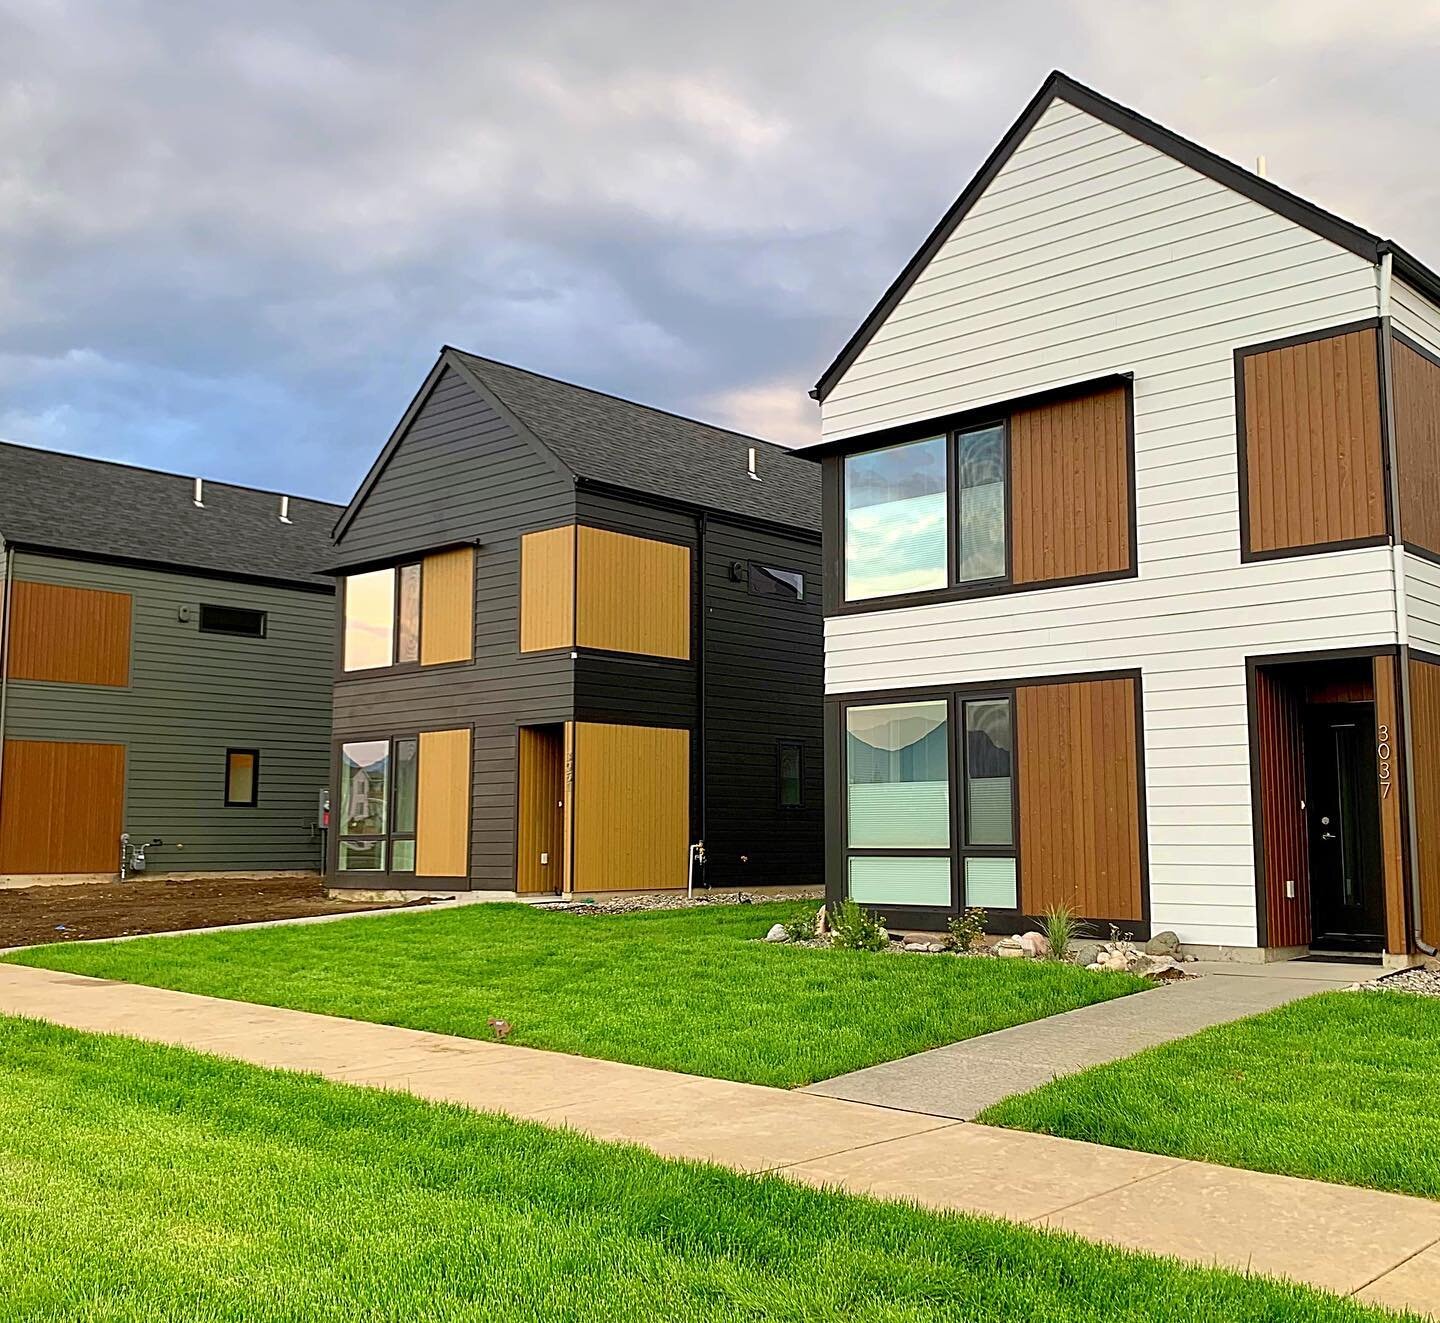 It&rsquo;s hard to go wrong with genuine wood siding accents. These homes feature Evolute 8 TOPCOAT&reg; exterior panels, one of our favorite Siparila products. 

Siparila's Evolute 8 cladding is thermally modified, making them more dimensionally sta